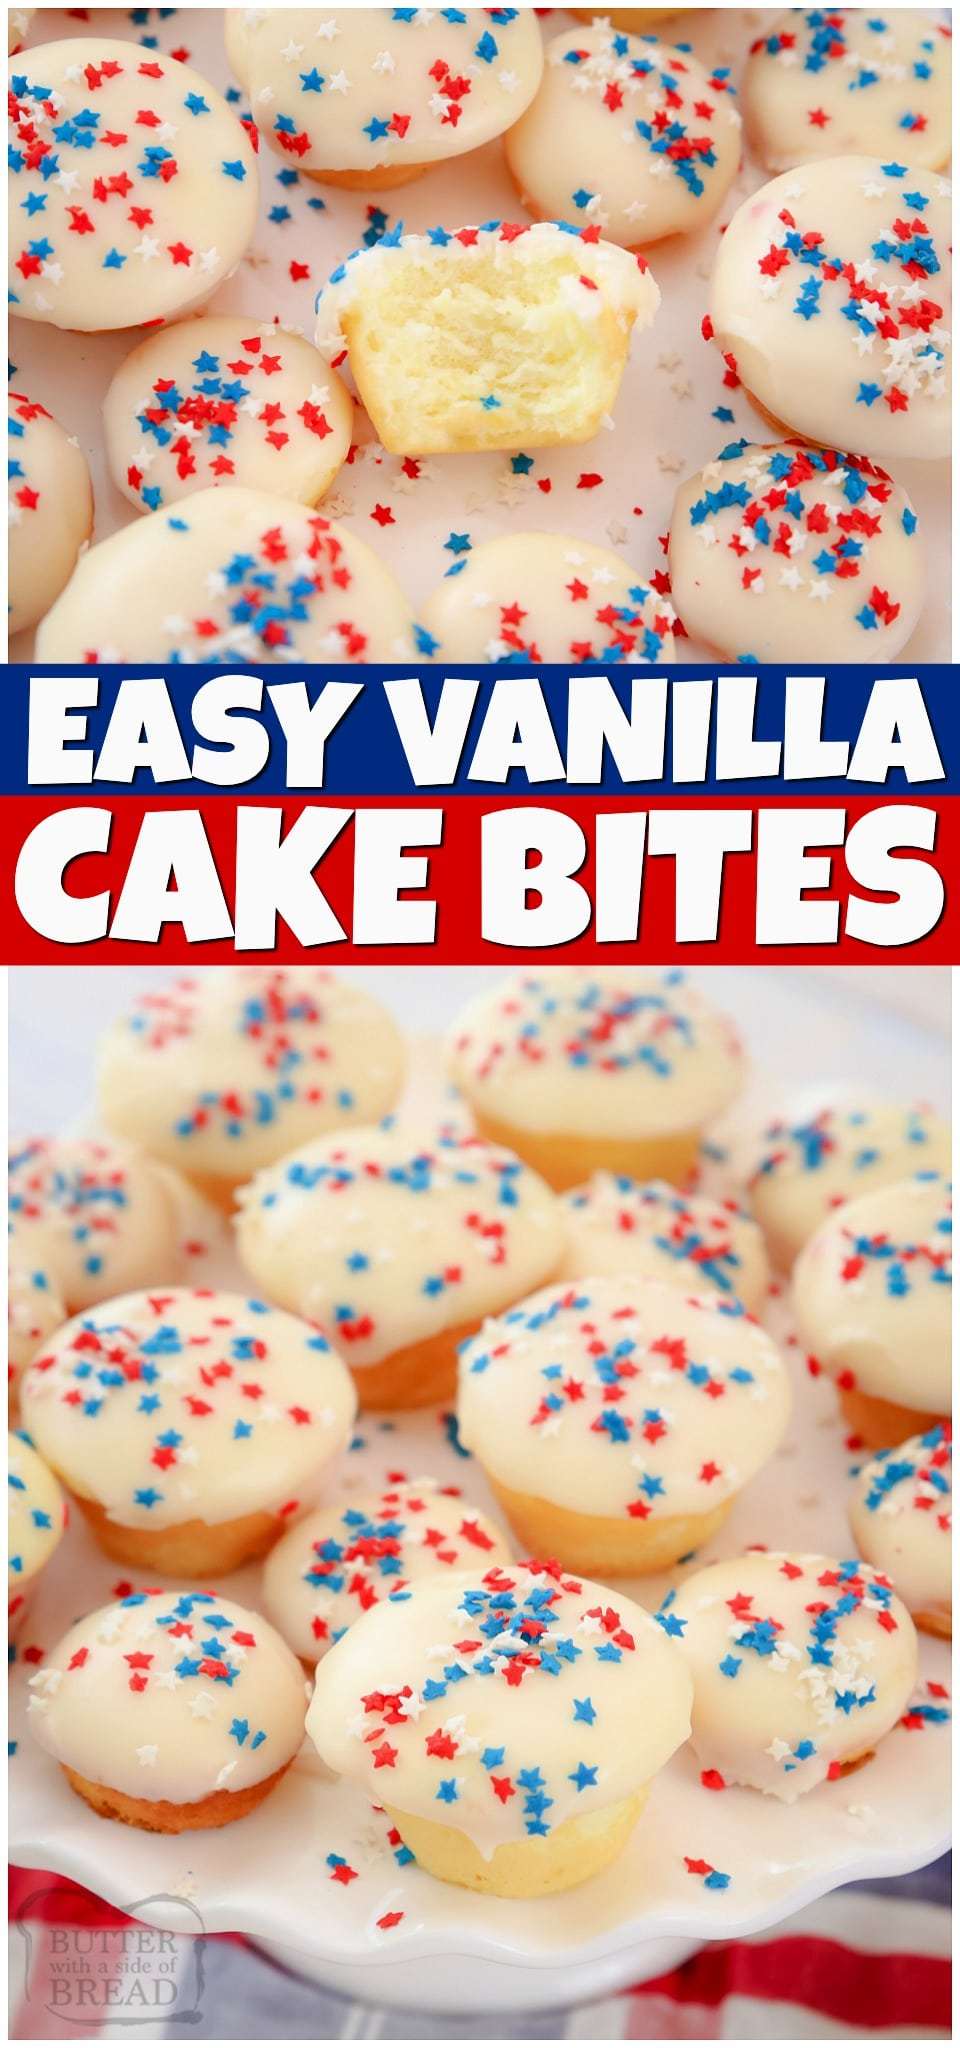 Easy Patriotic Vanilla Cake Bites are simple glazed bite-sized treats that are so easy to make! Super cute & beyond tasty, these vanilla cake bites will be the hit of your 4th of July party! #cake #cupcakes #patriotic #redwhiteblue #4thofJuly #dessert #baking #festive #recipe from BUTTER WITH A SIDE OF BREAD